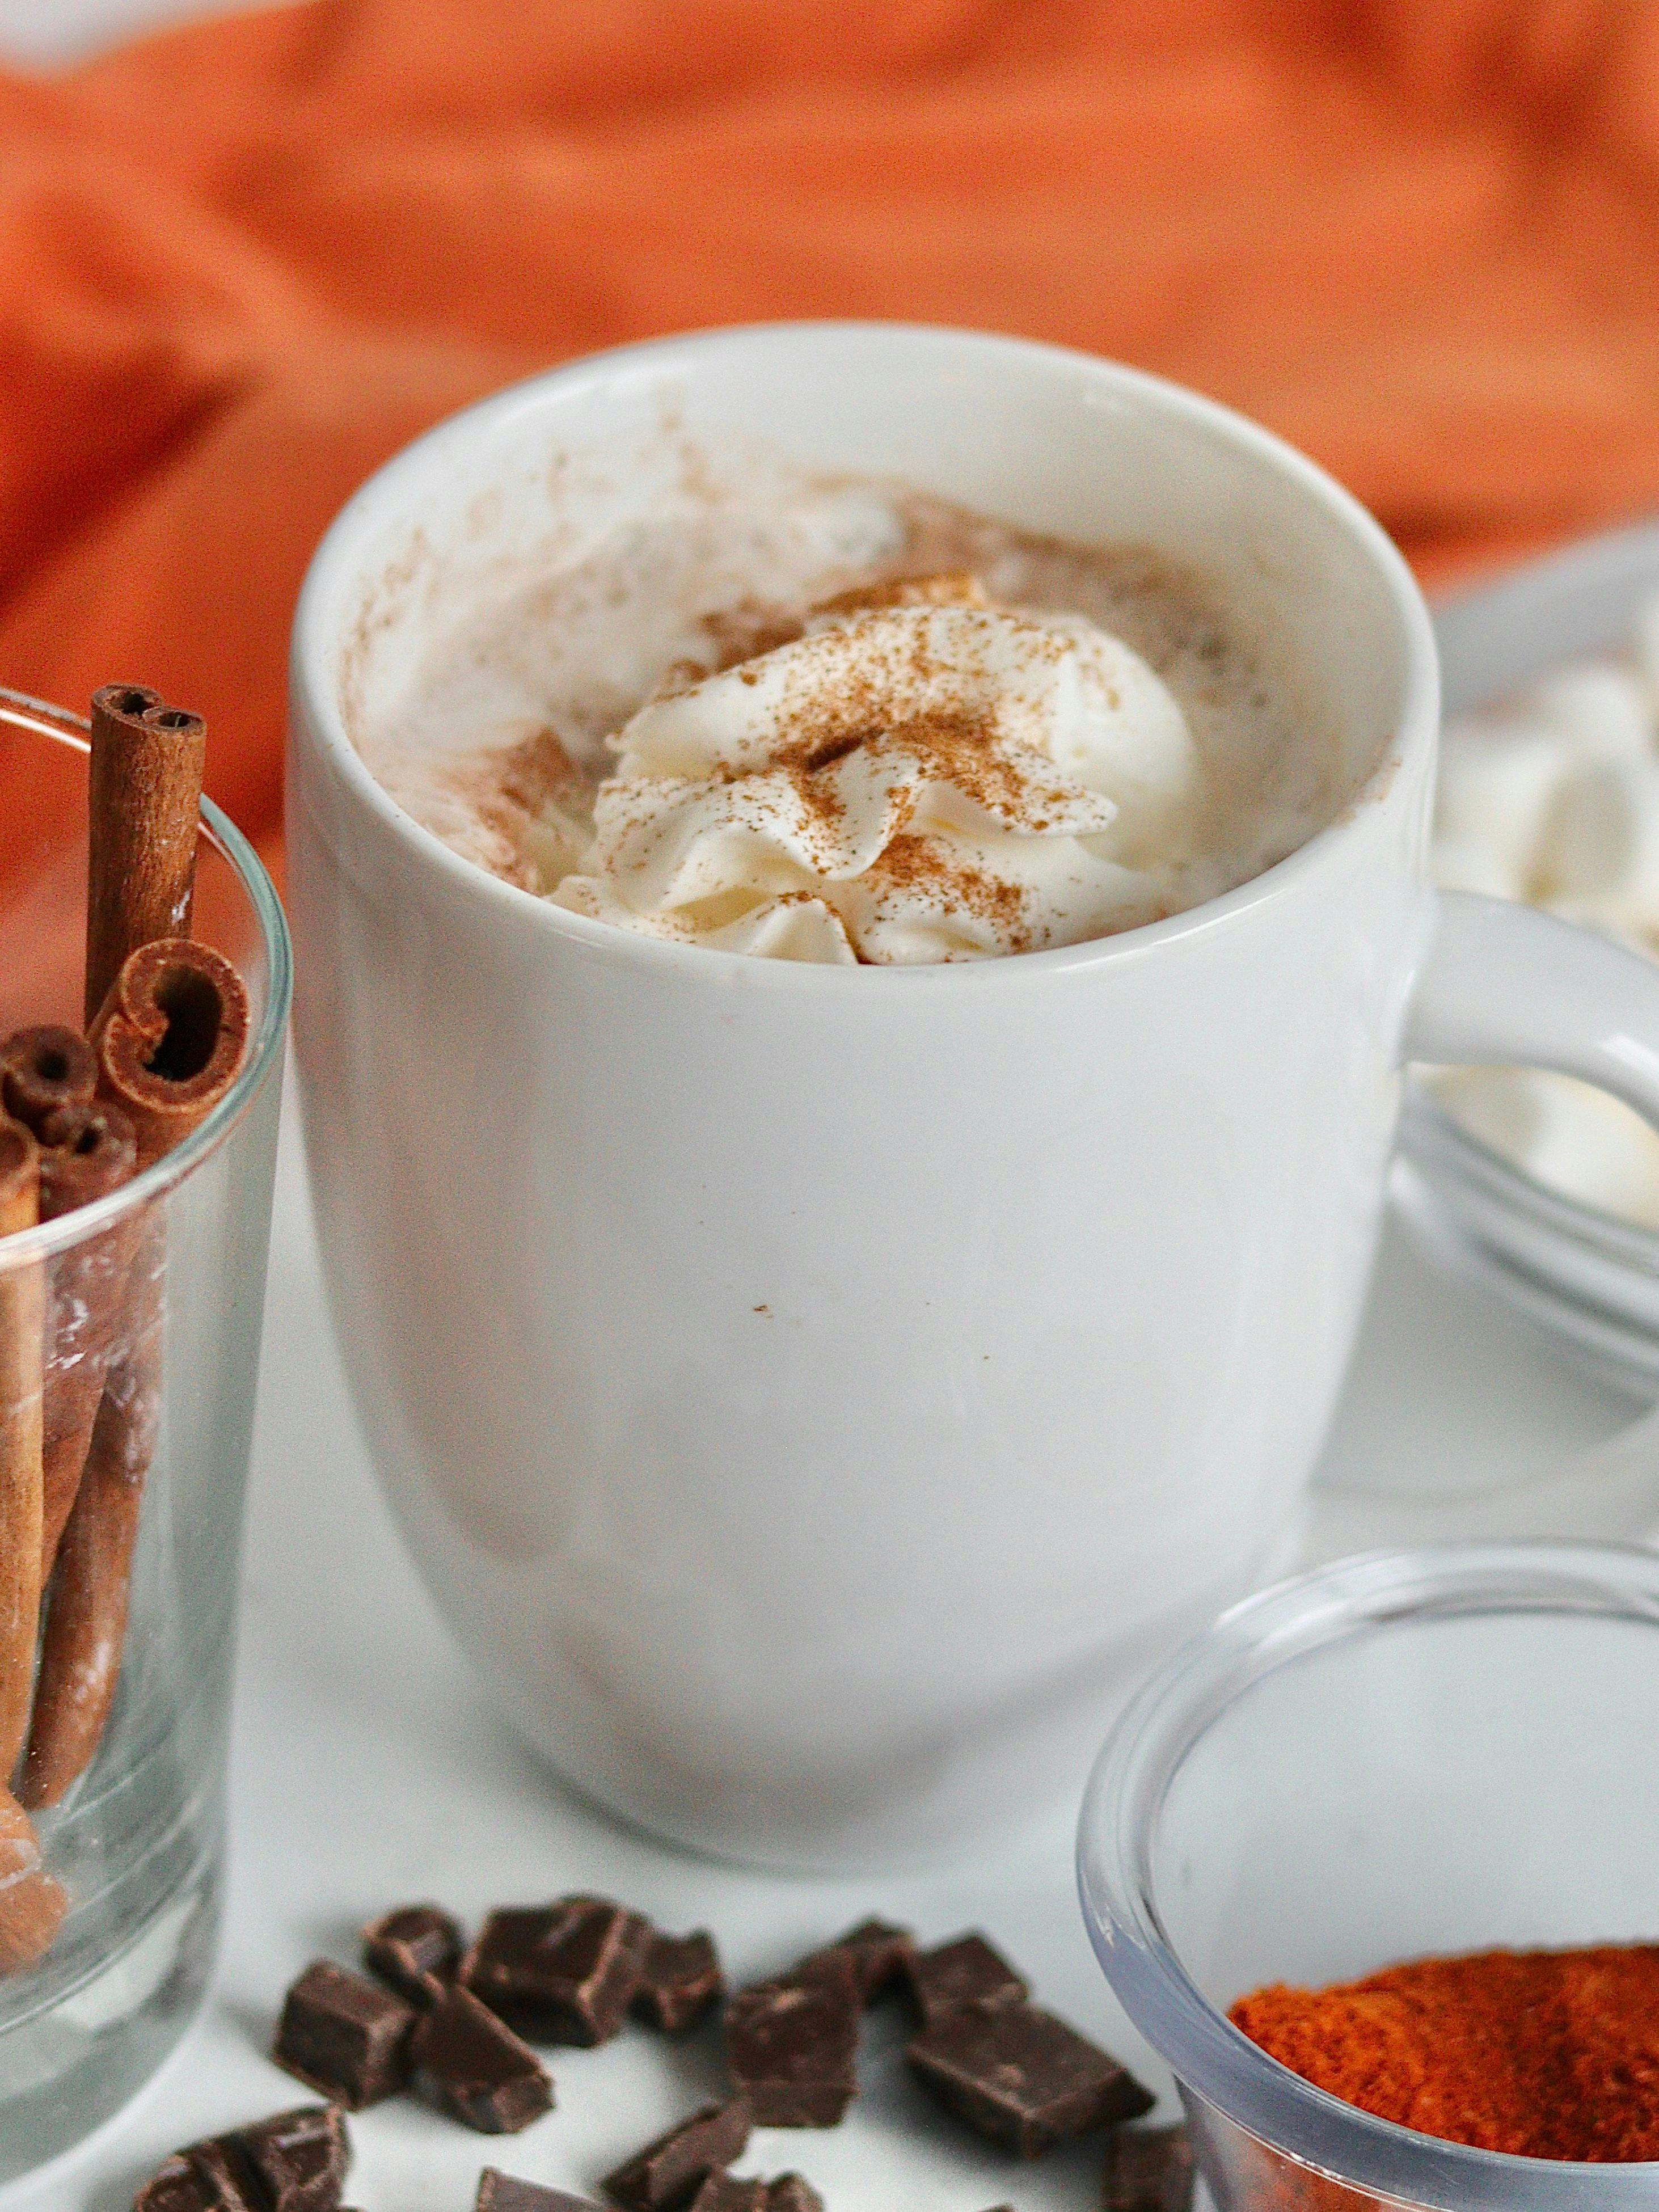 A cup of Mexican hot chocolate with cinnamon sticks and whipped cream.